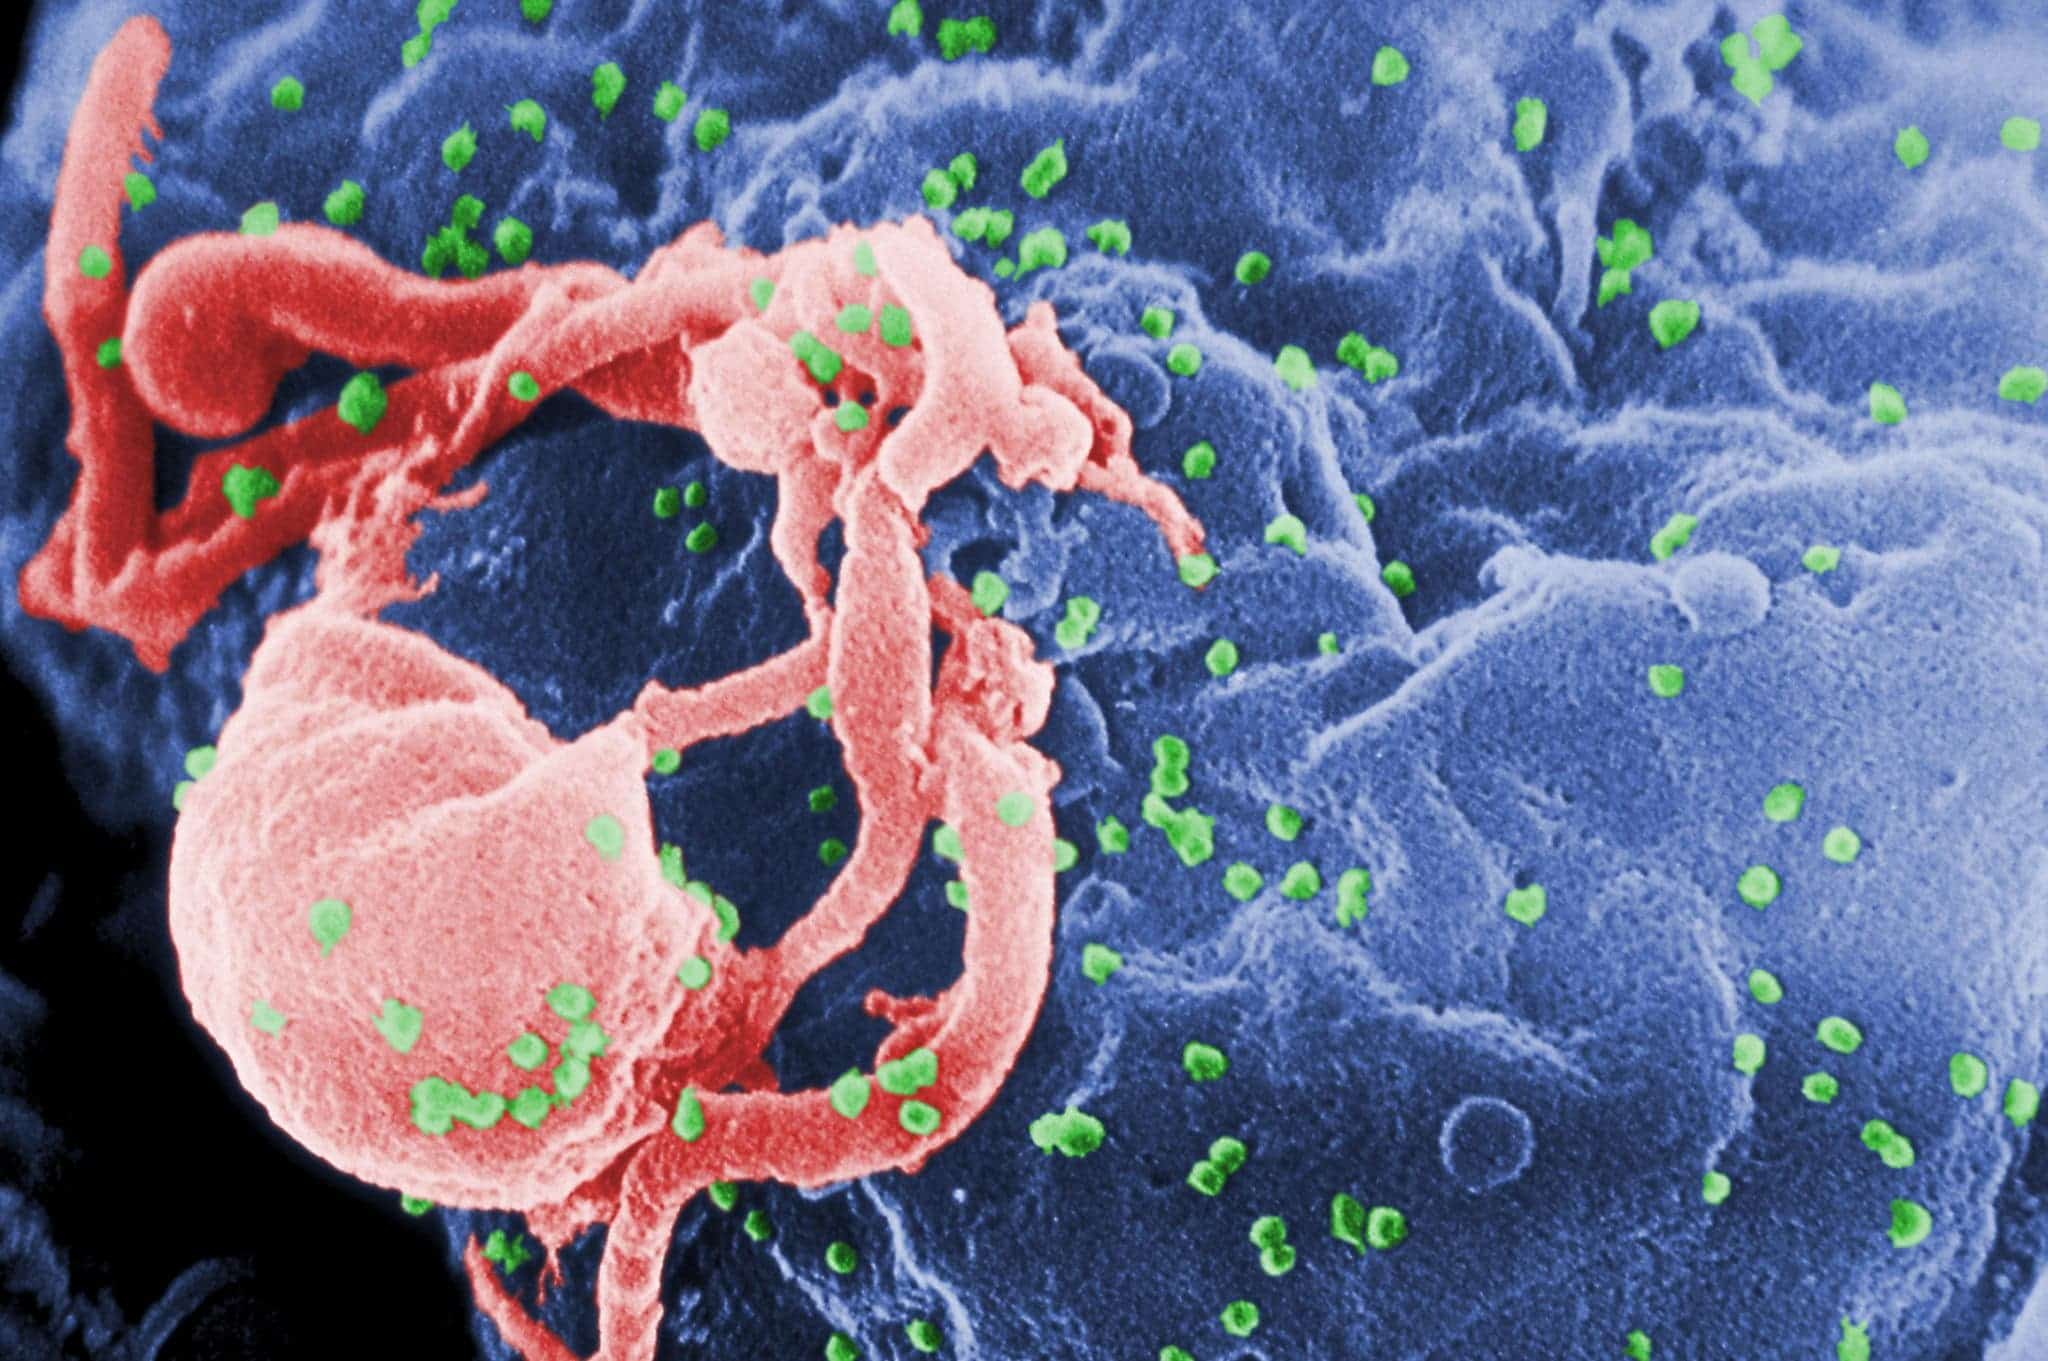 Scanning electron micrograph of HIV-1, colored green, budding from a cultured lymphocyte.  Photo Credit: C. Goldsmith Content Providers: CDC